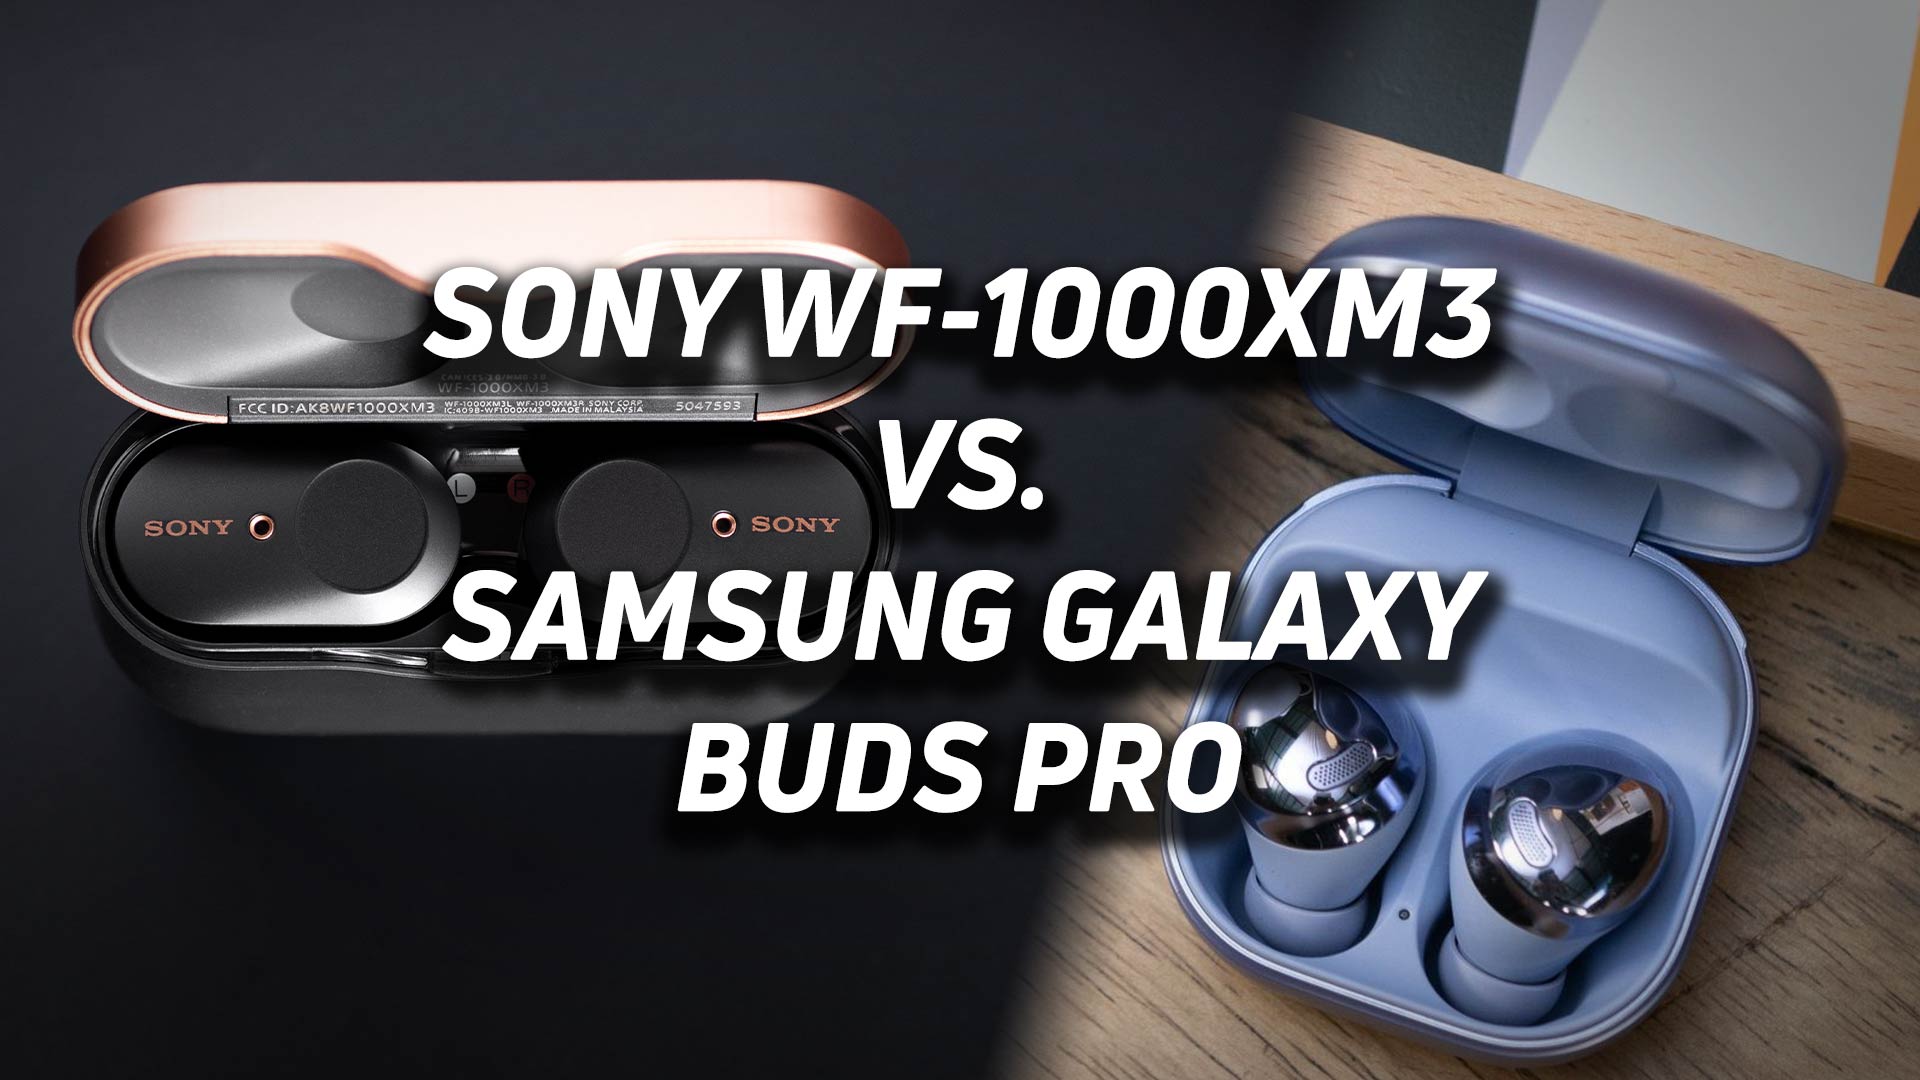 A blended image of the Sony WF-1000XM3 next to the Samsung Galaxy Buds Pro with the versus text overlaid.